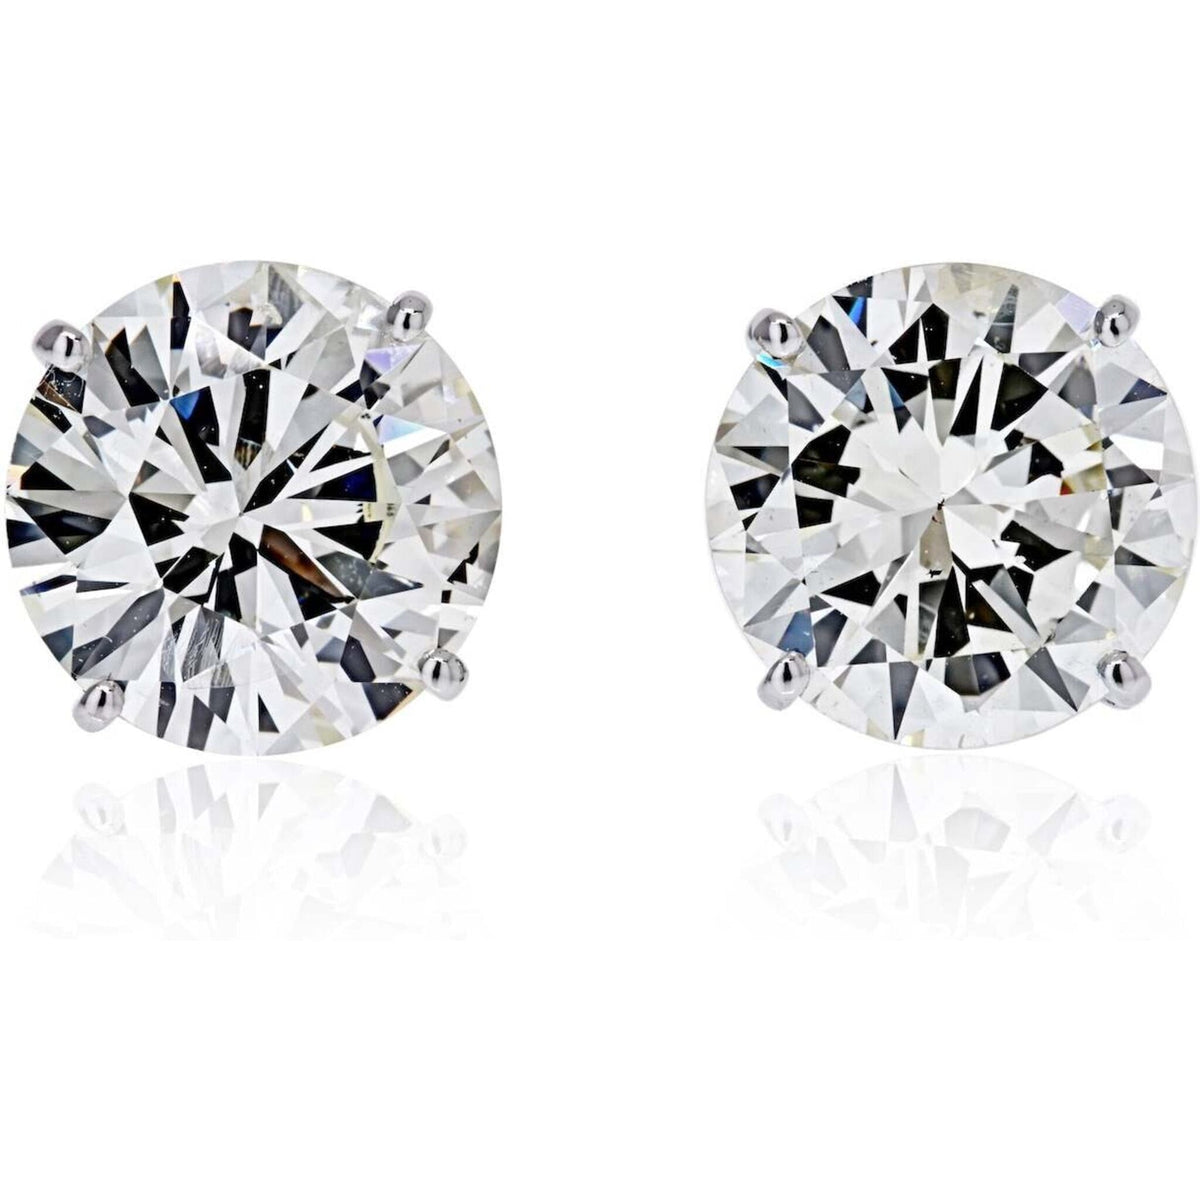 Exquisite diamond stud earrings displayed at Robinson's Jewelers